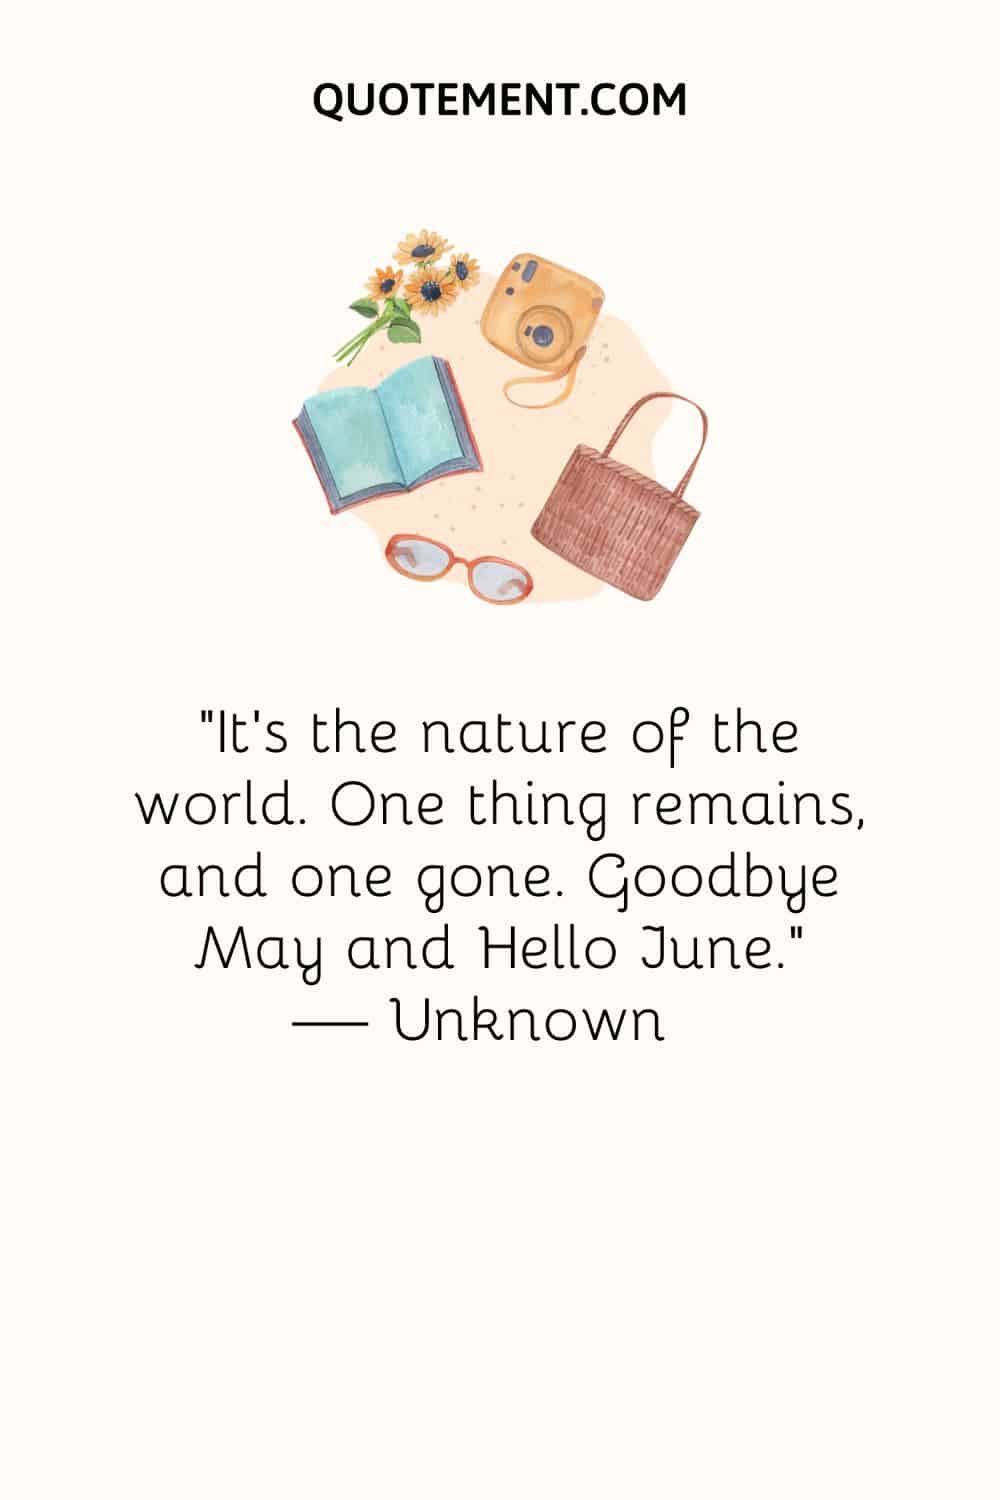 “It’s the nature of the world. One thing remains, and one gone. Goodbye May and Hello June.” — Unknown